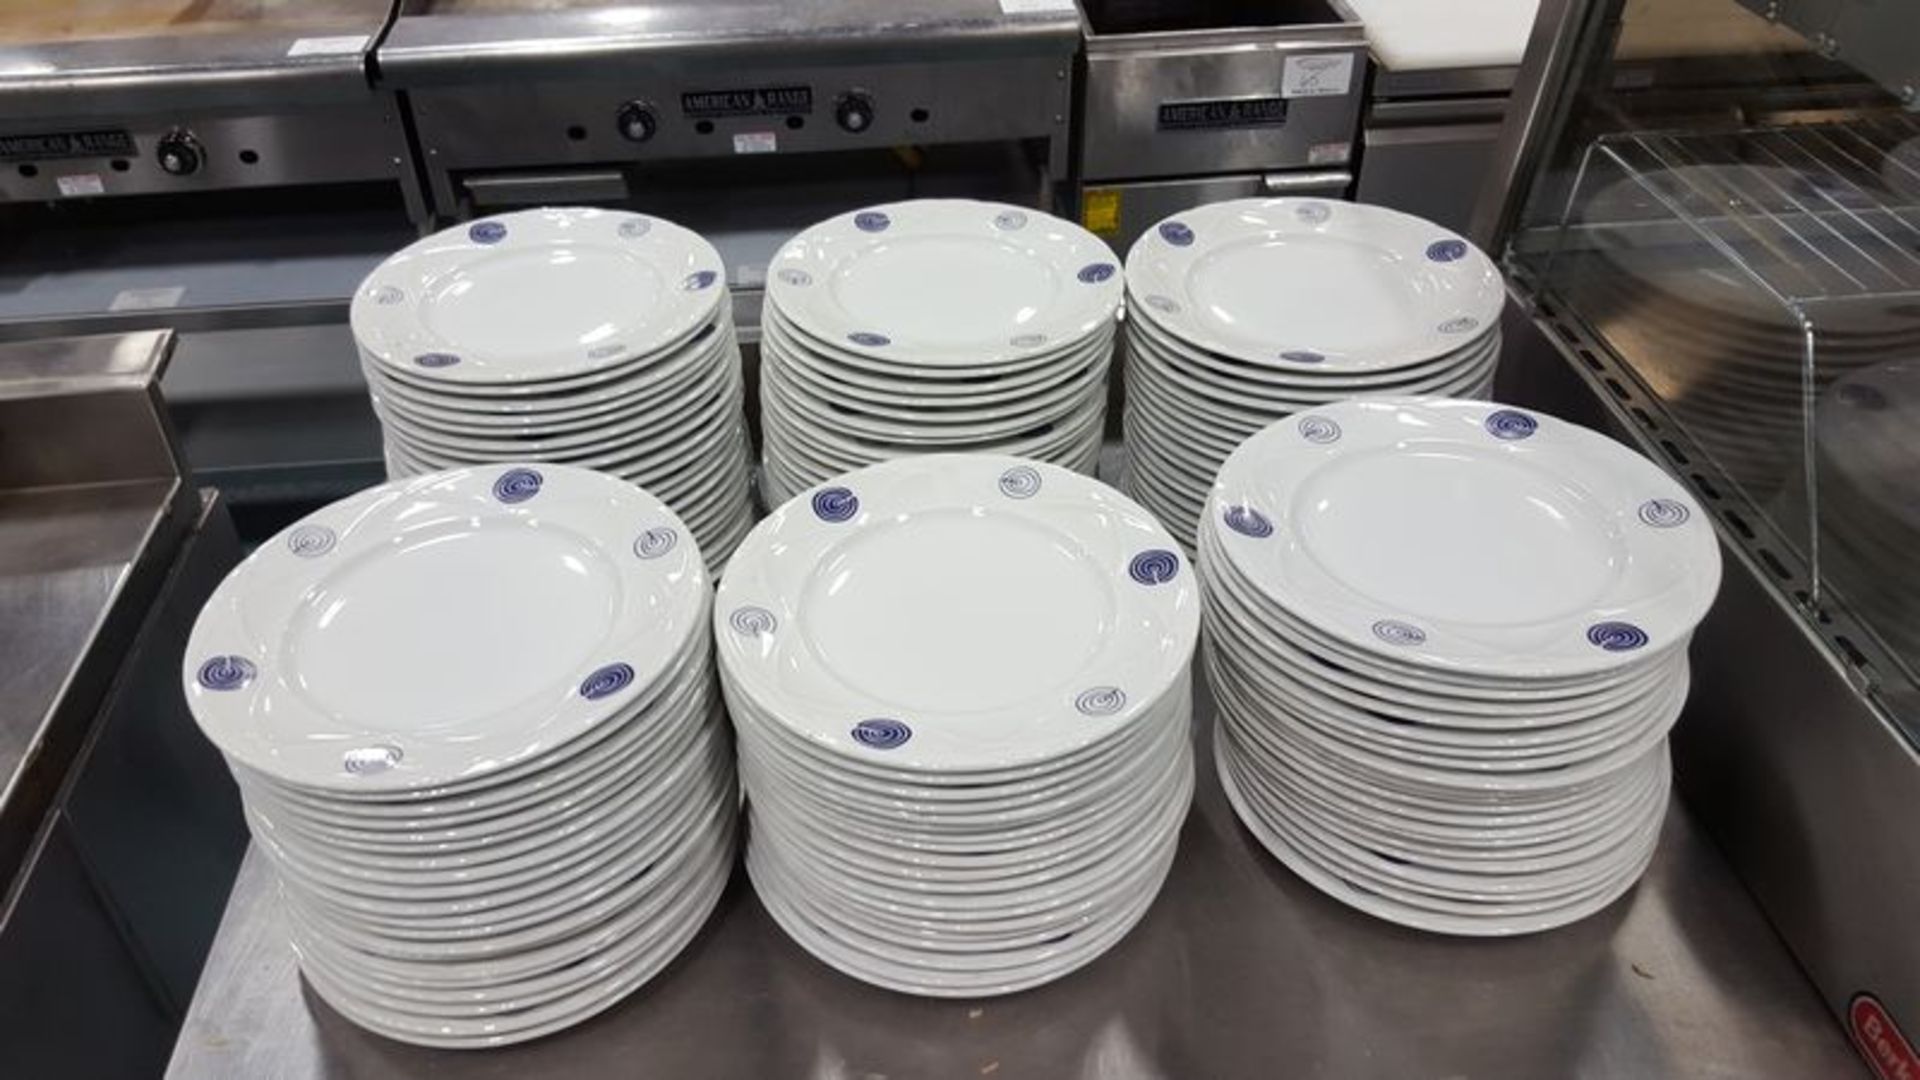 120  each -  10.5 inch new plates in original boxes